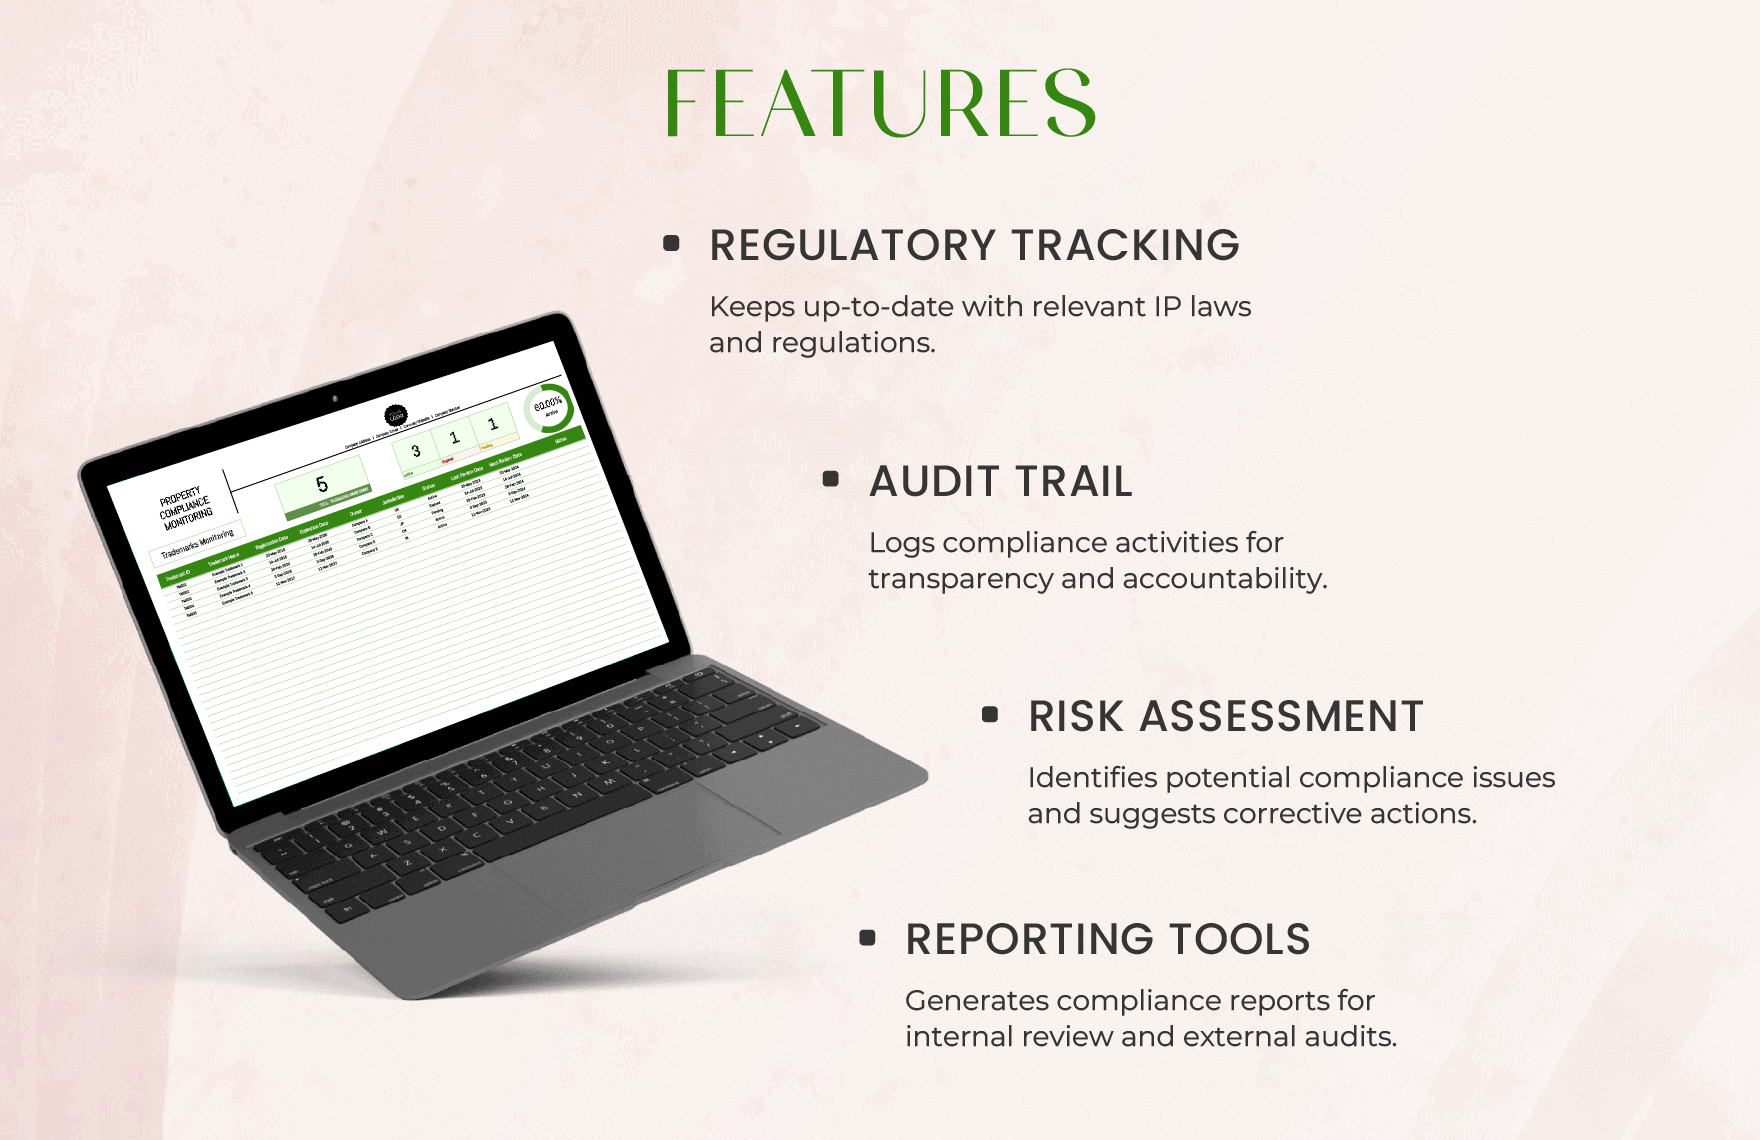 Legal Intellectual Property Compliance Monitoring Template